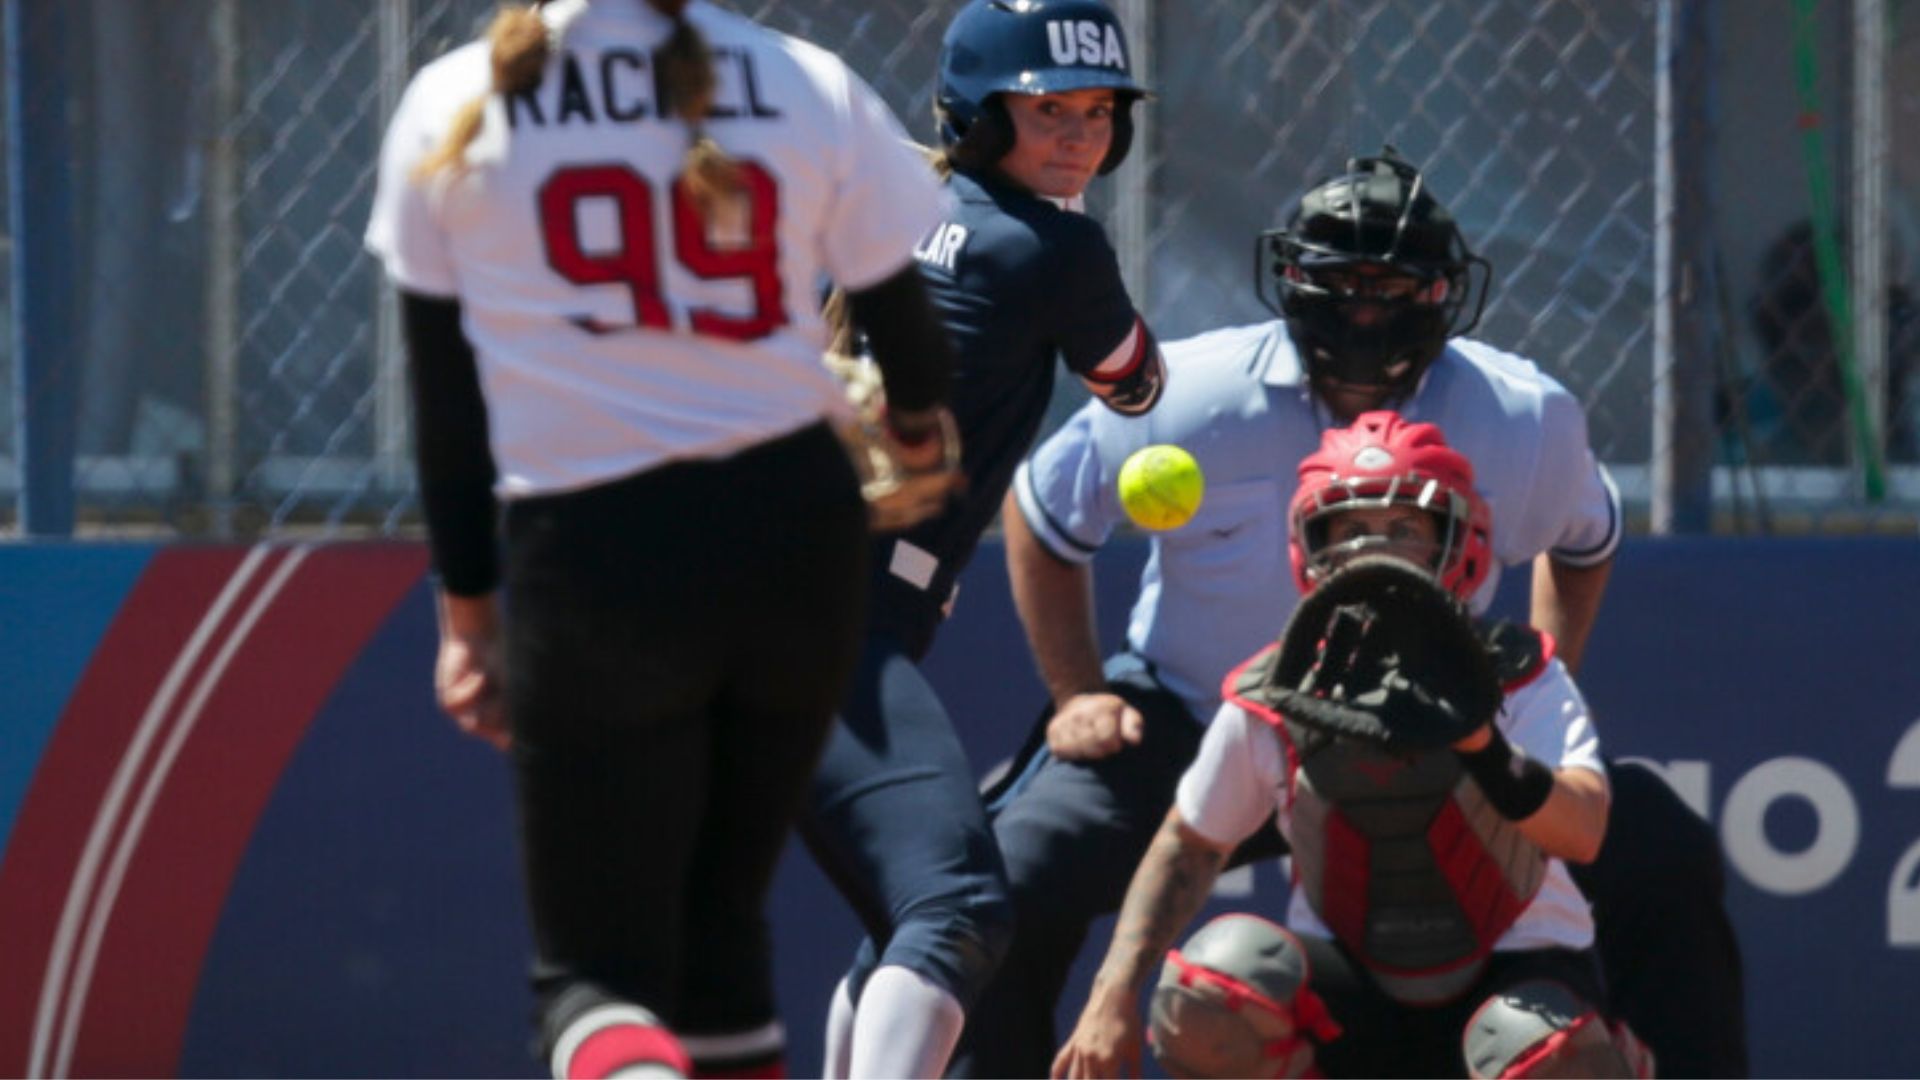 Softball: Canada defeats Mexico and Secures the Bronze